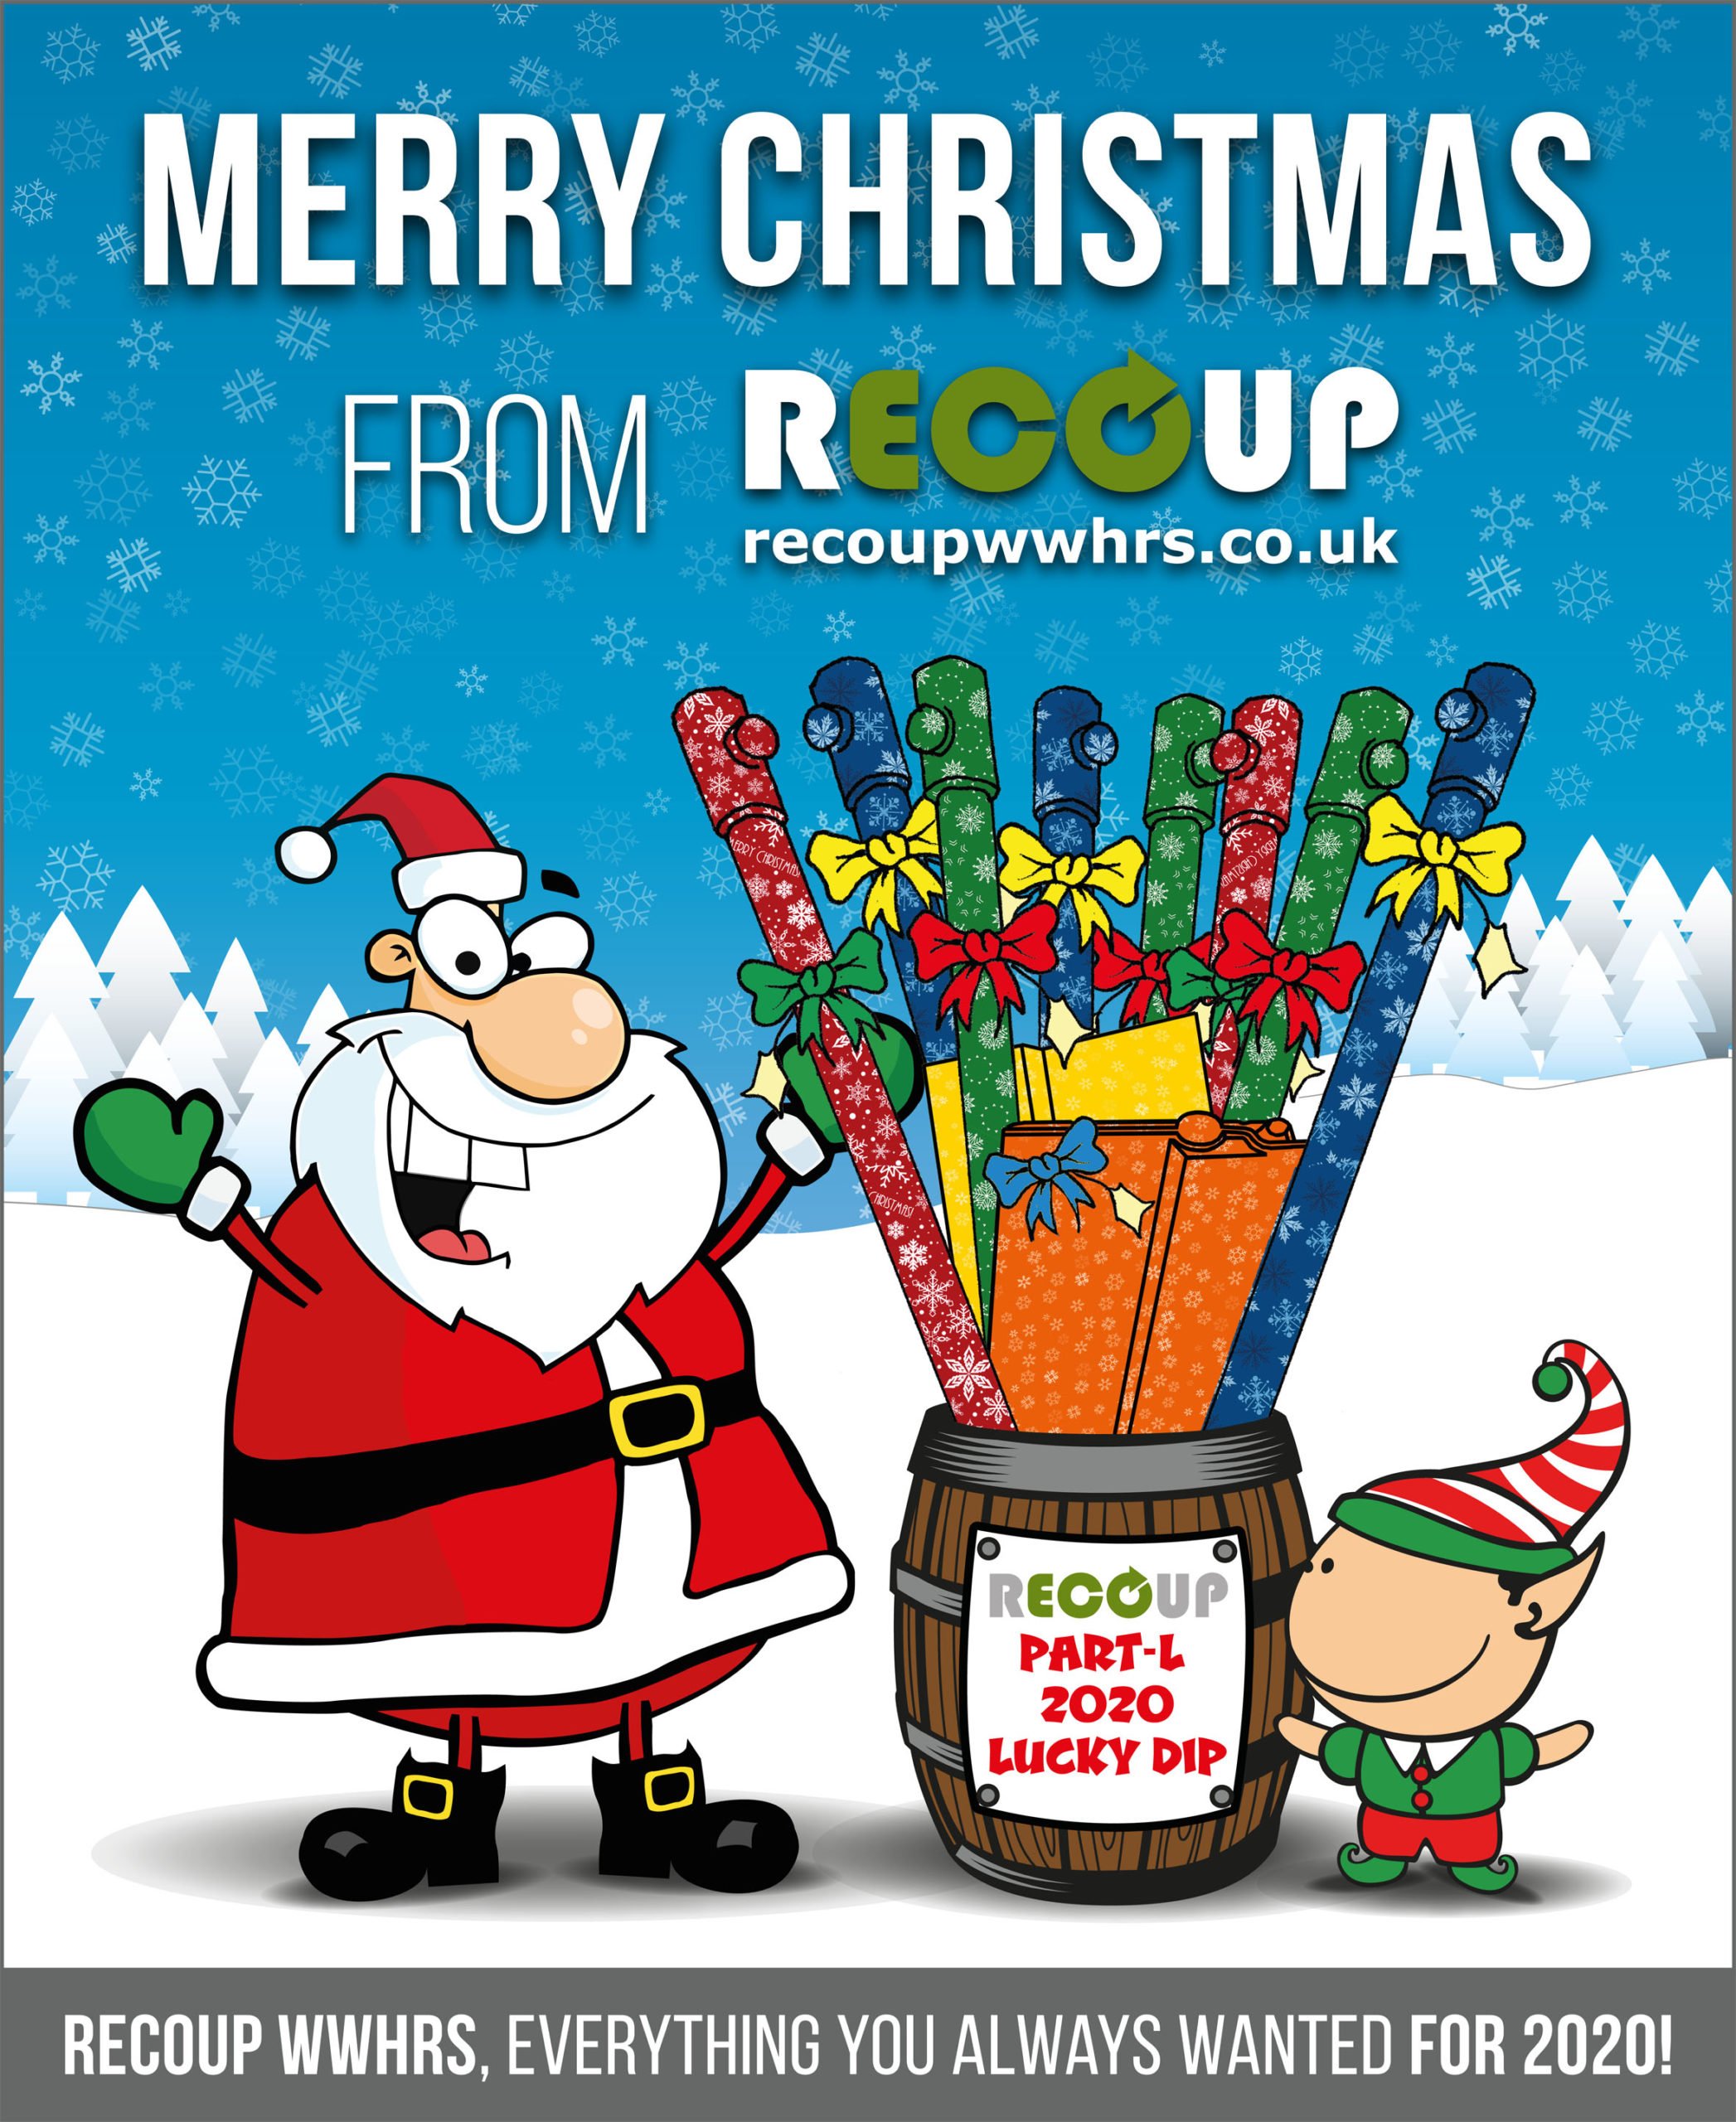 Merry Christmas and Happy New Year from Recoup WWHRS 